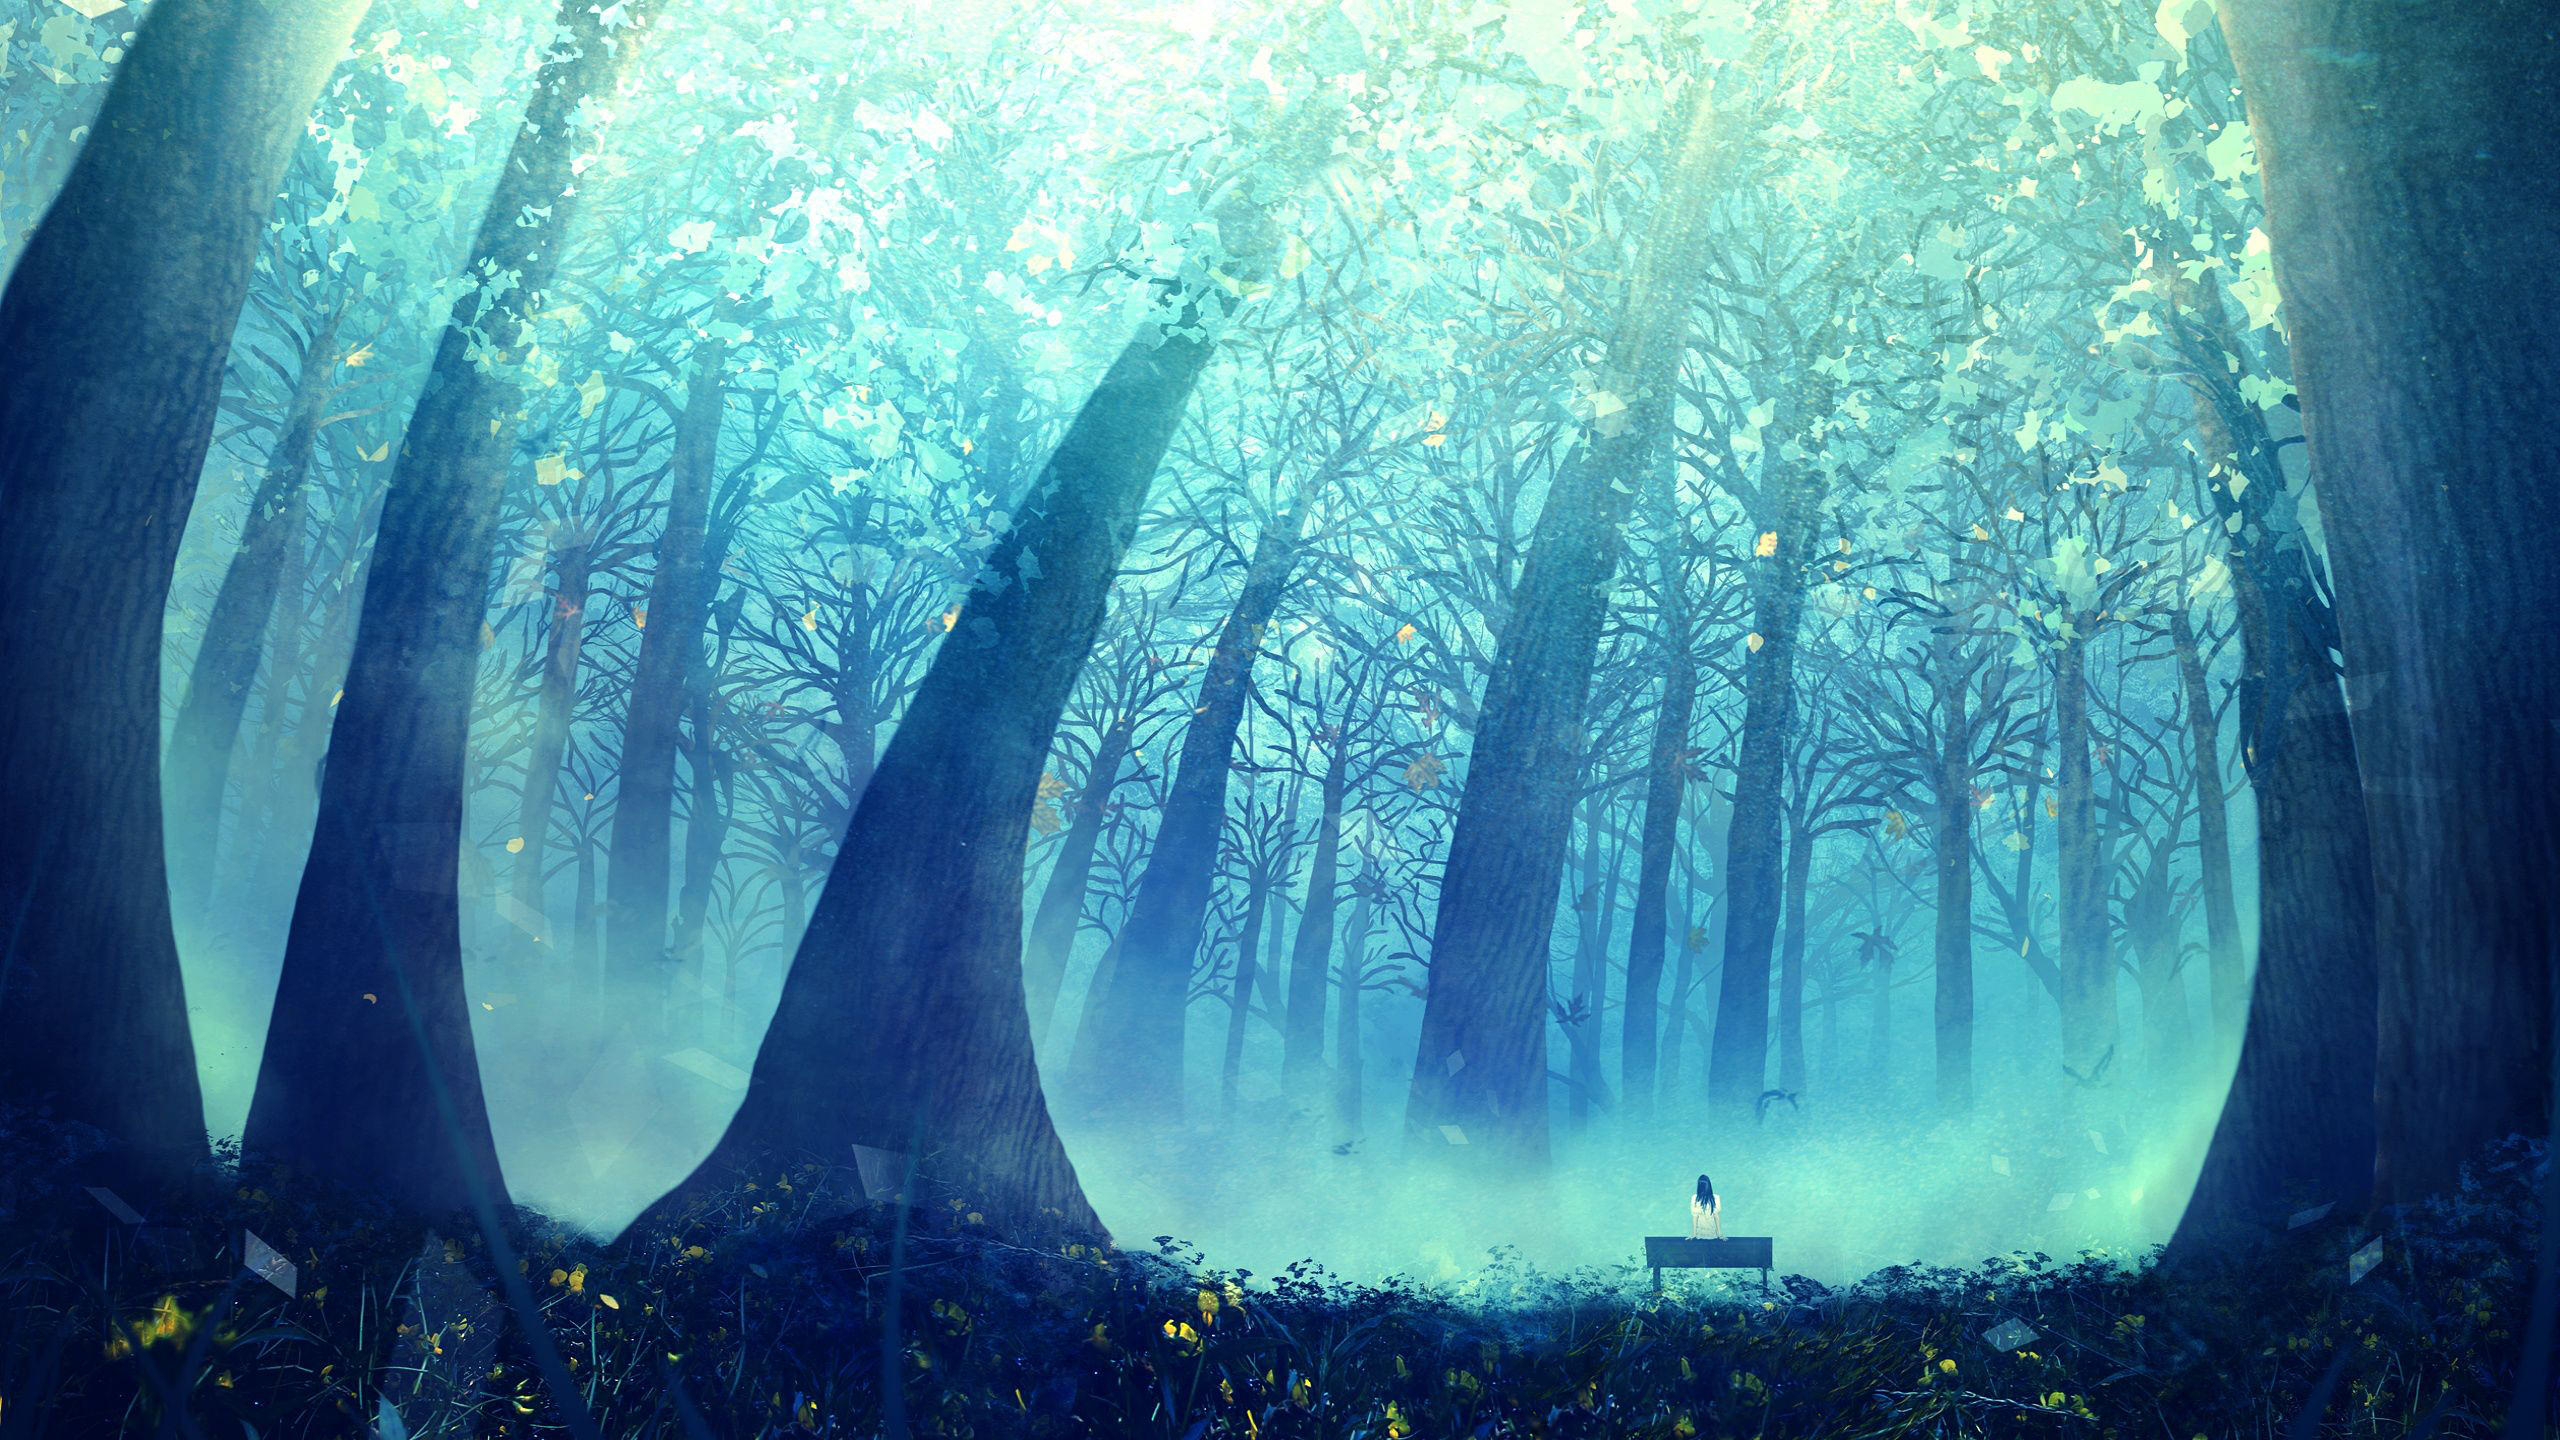 HD desktop wallpaper Anime Forest download free picture 751832